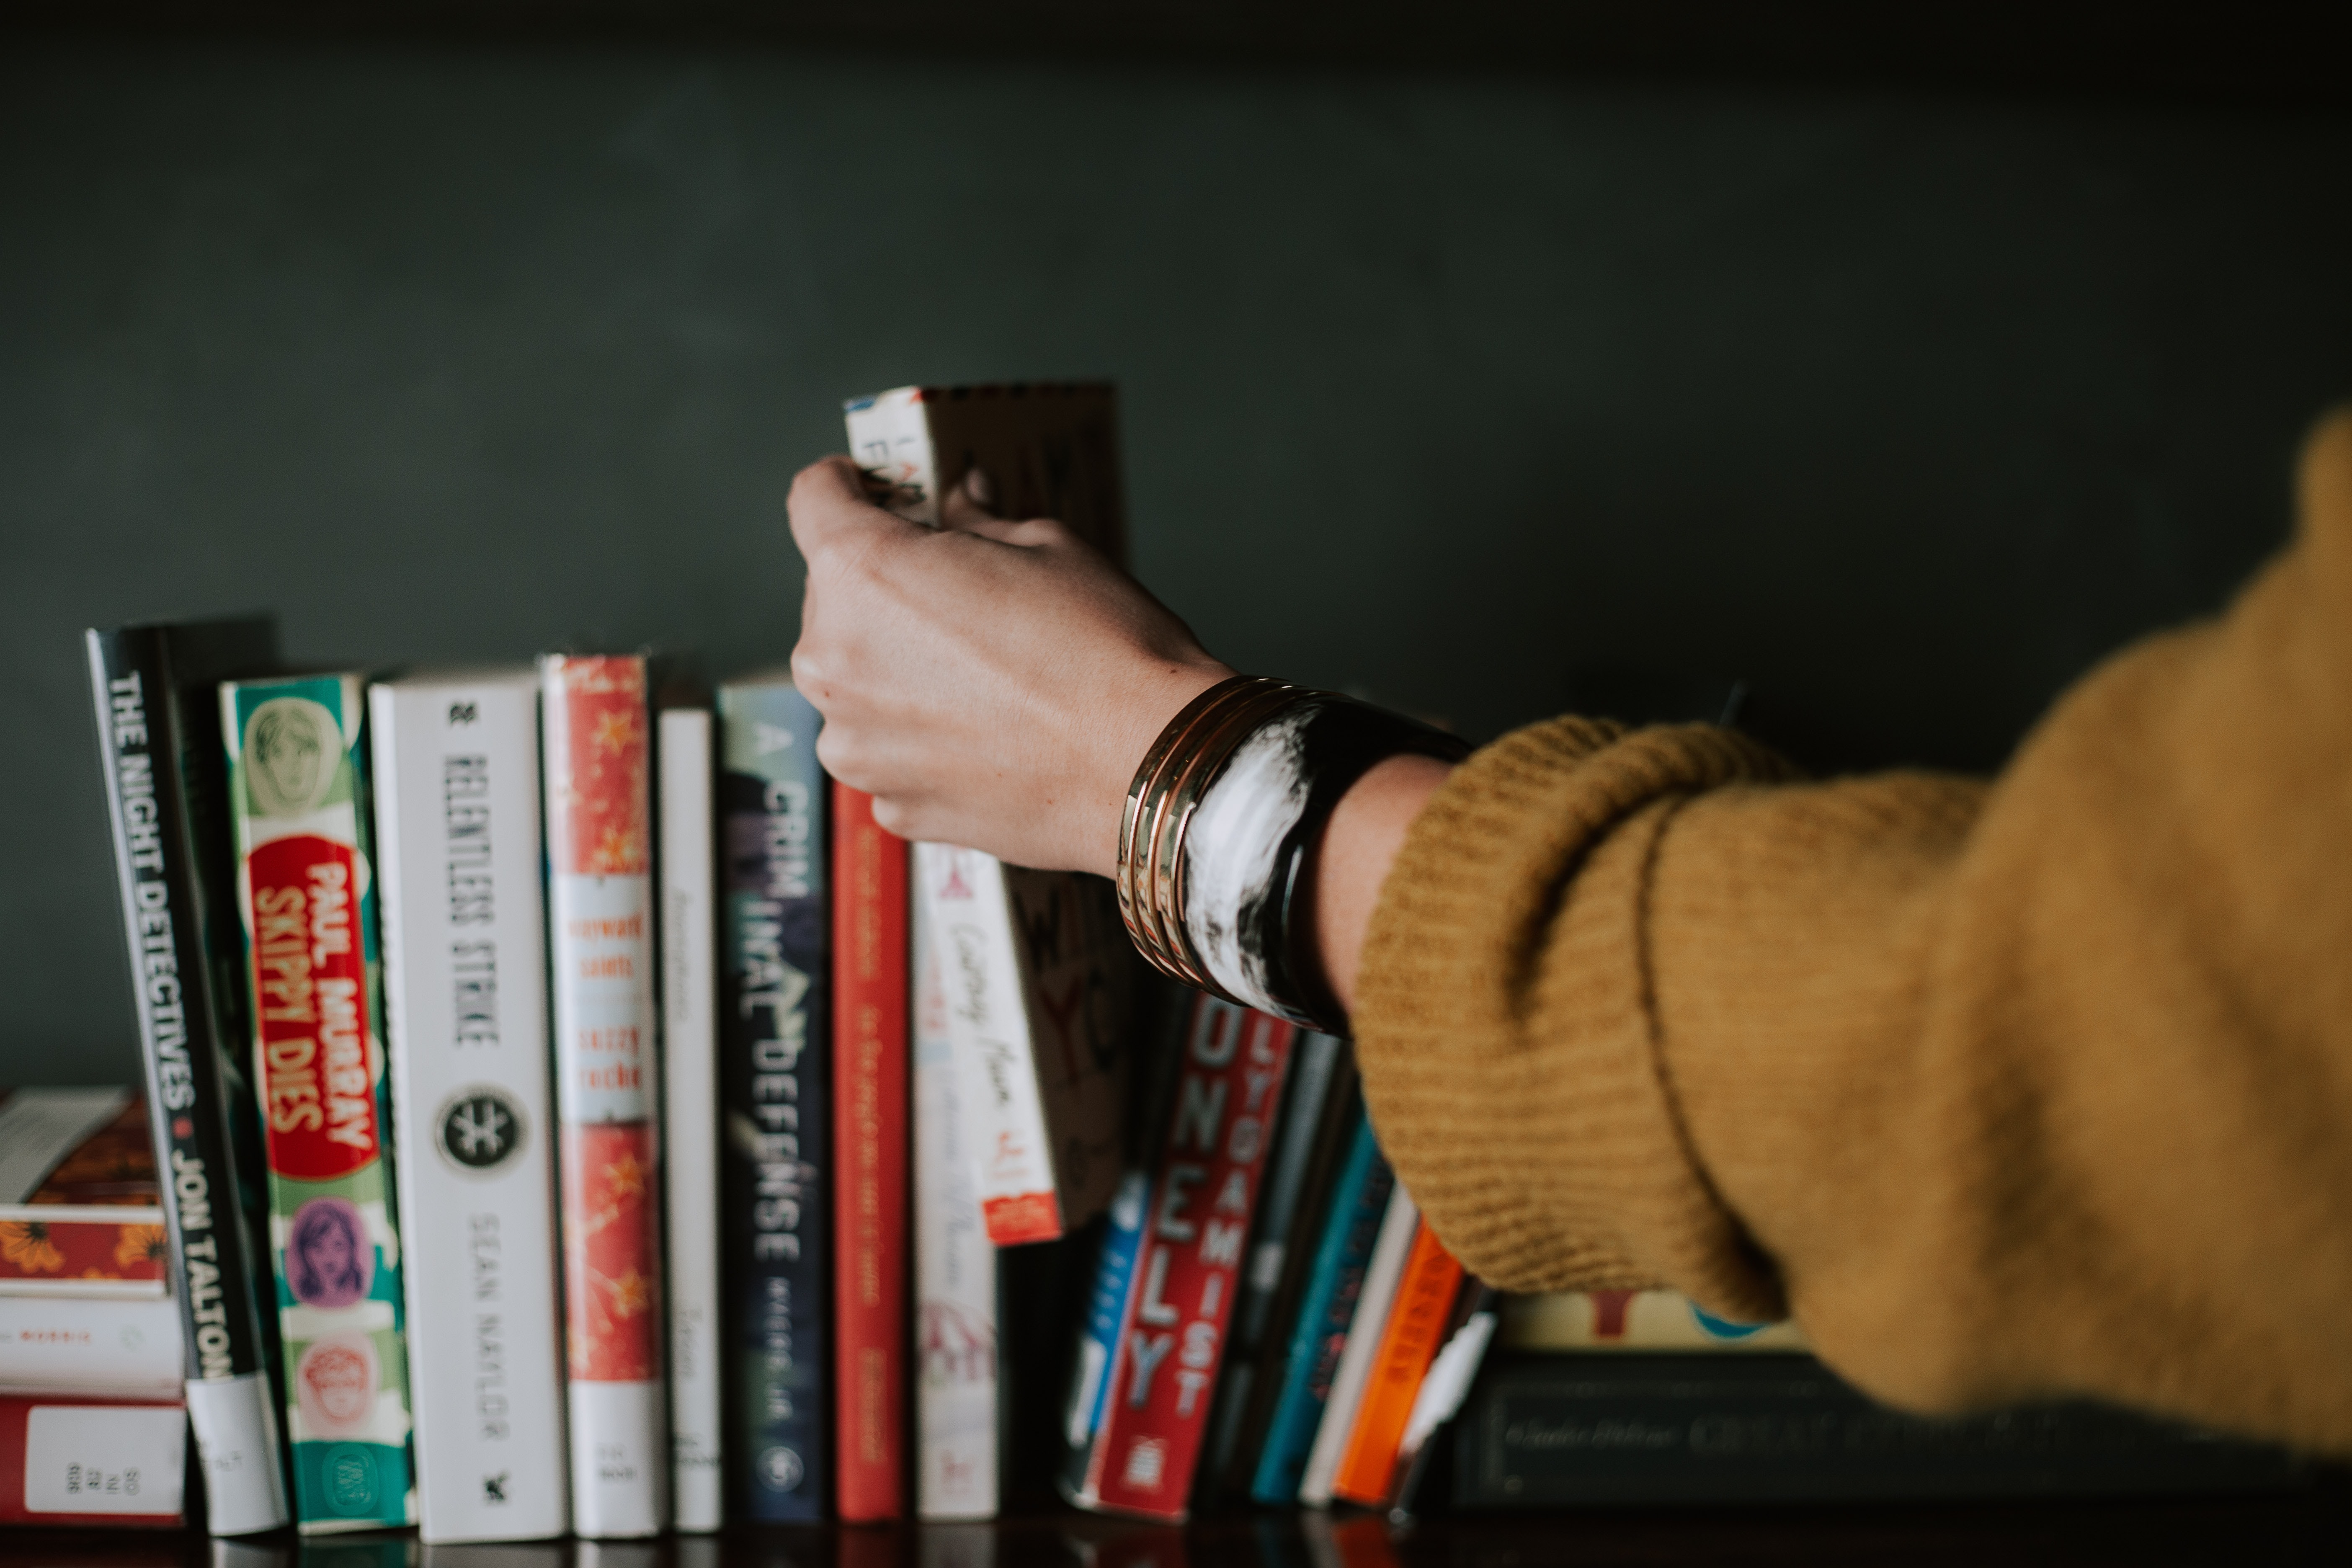 Photo by Christin Hume on Unsplash of a girl reaching for a book